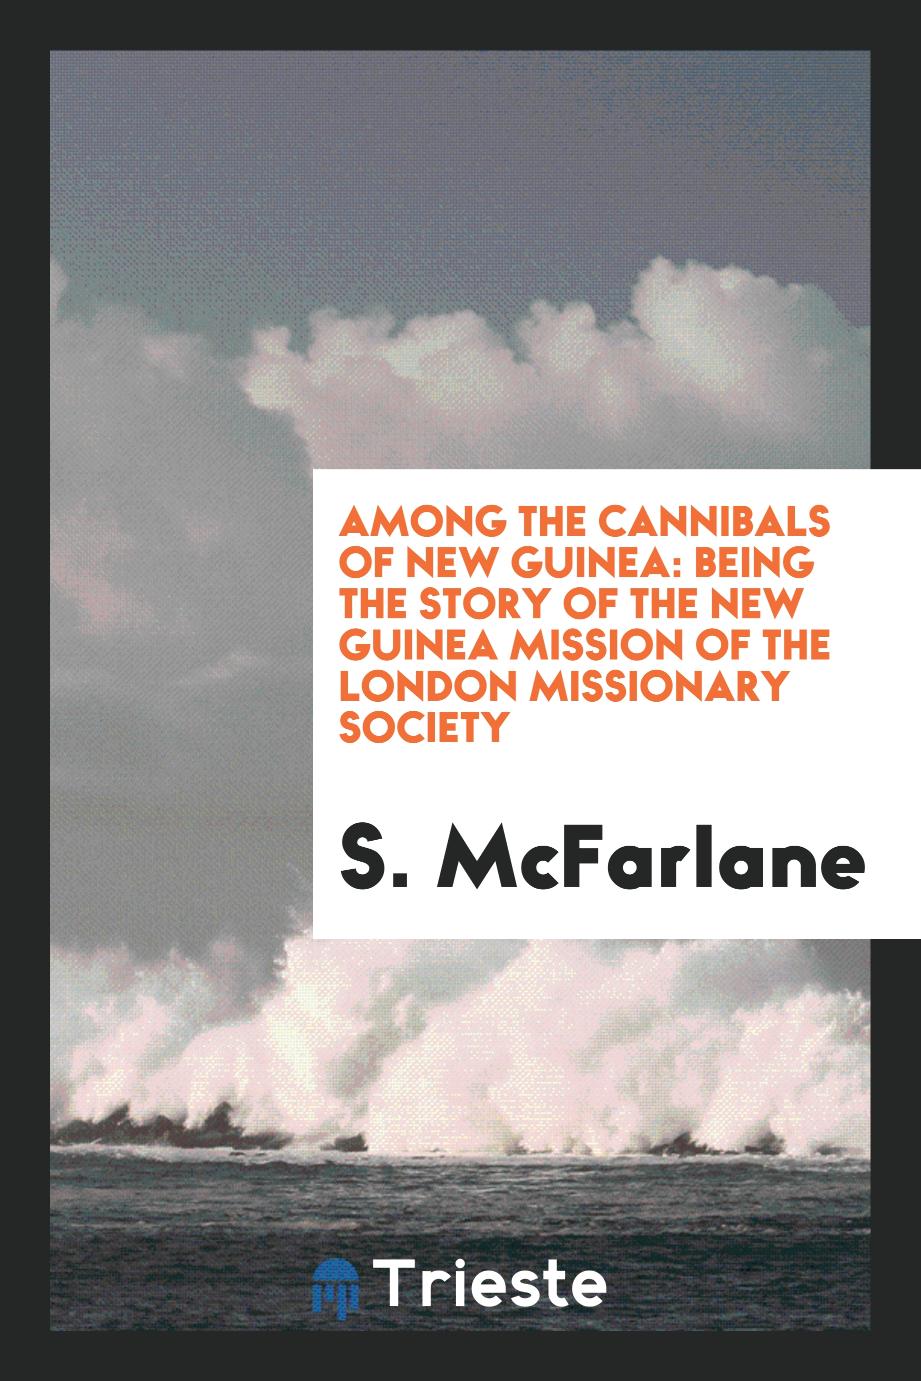 Among the cannibals of New Guinea: being the story of the New Guinea mission of the London Missionary Society